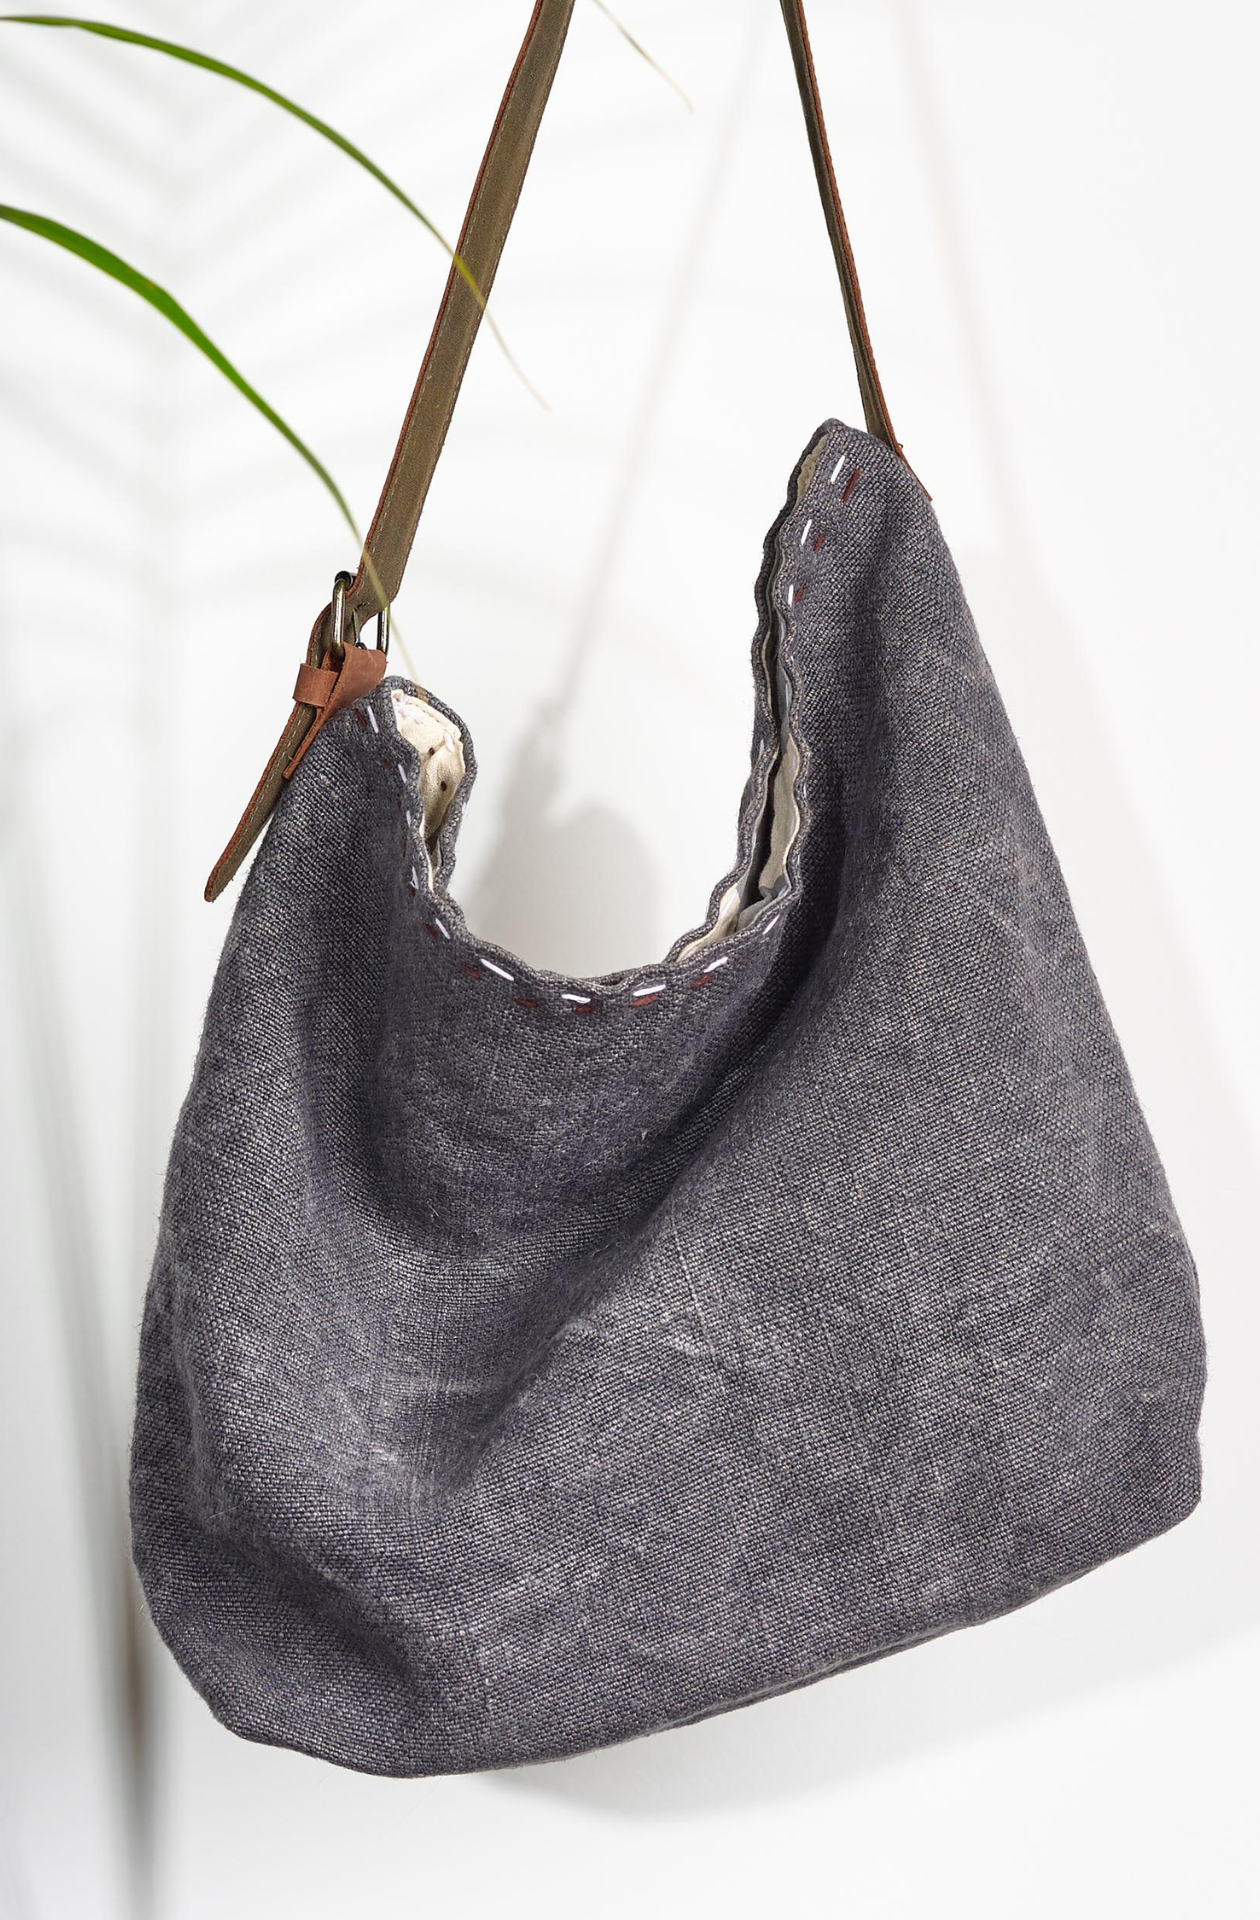 Charcoal All the world Jute Bag. The washed dark grey is contrasted with two lines of black and white stitching at the top of the bag in between the warm brown leather strap with a golden buckle. 